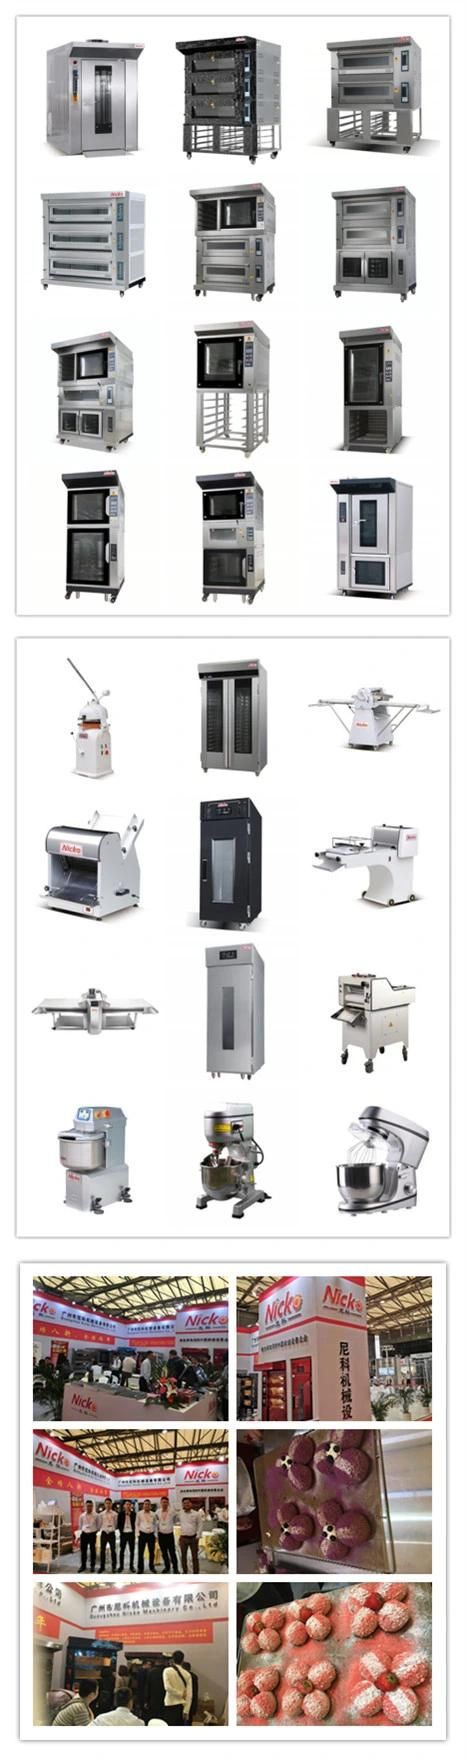 Nicko Gas Commercial Rotary Oven for Baking Machines